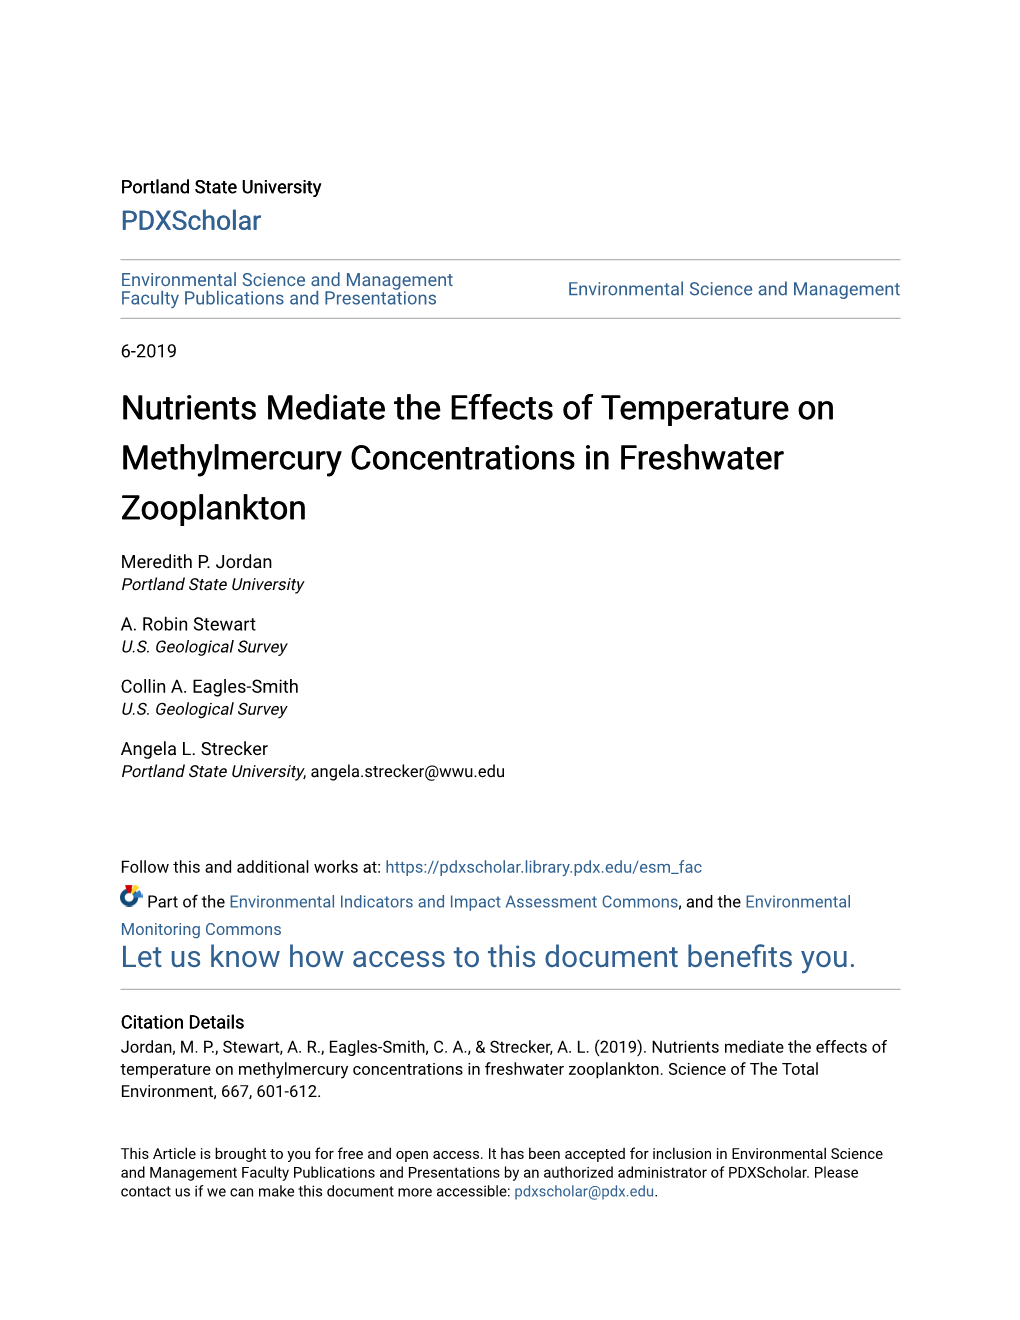 Nutrients Mediate the Effects of Temperature on Methylmercury Concentrations in Freshwater Zooplankton